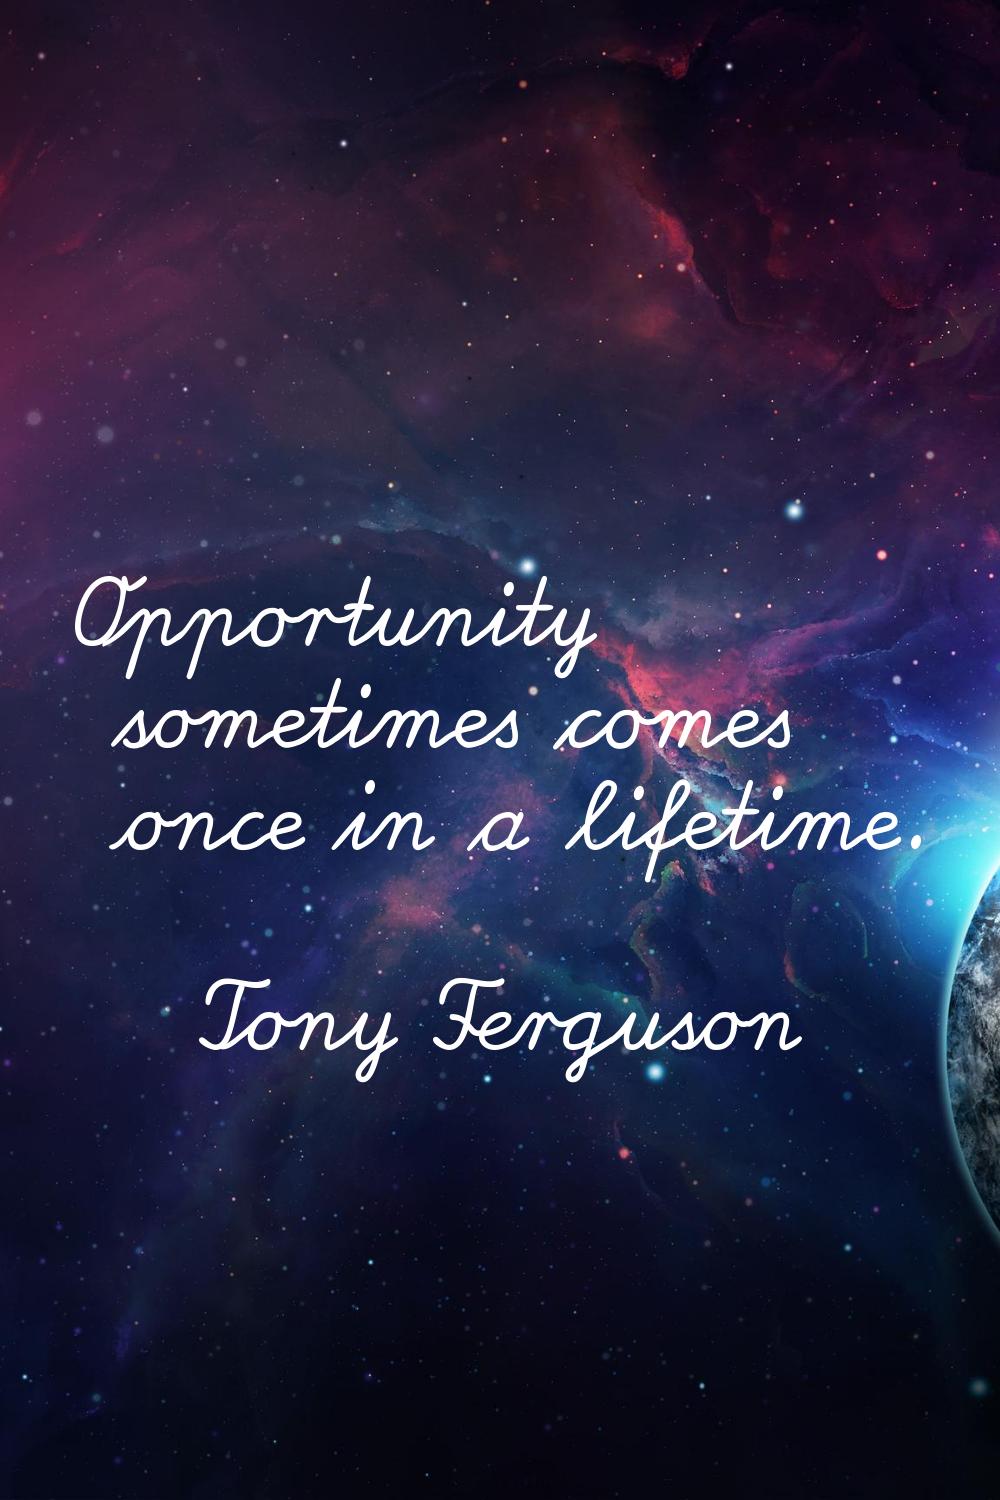 Opportunity sometimes comes once in a lifetime.